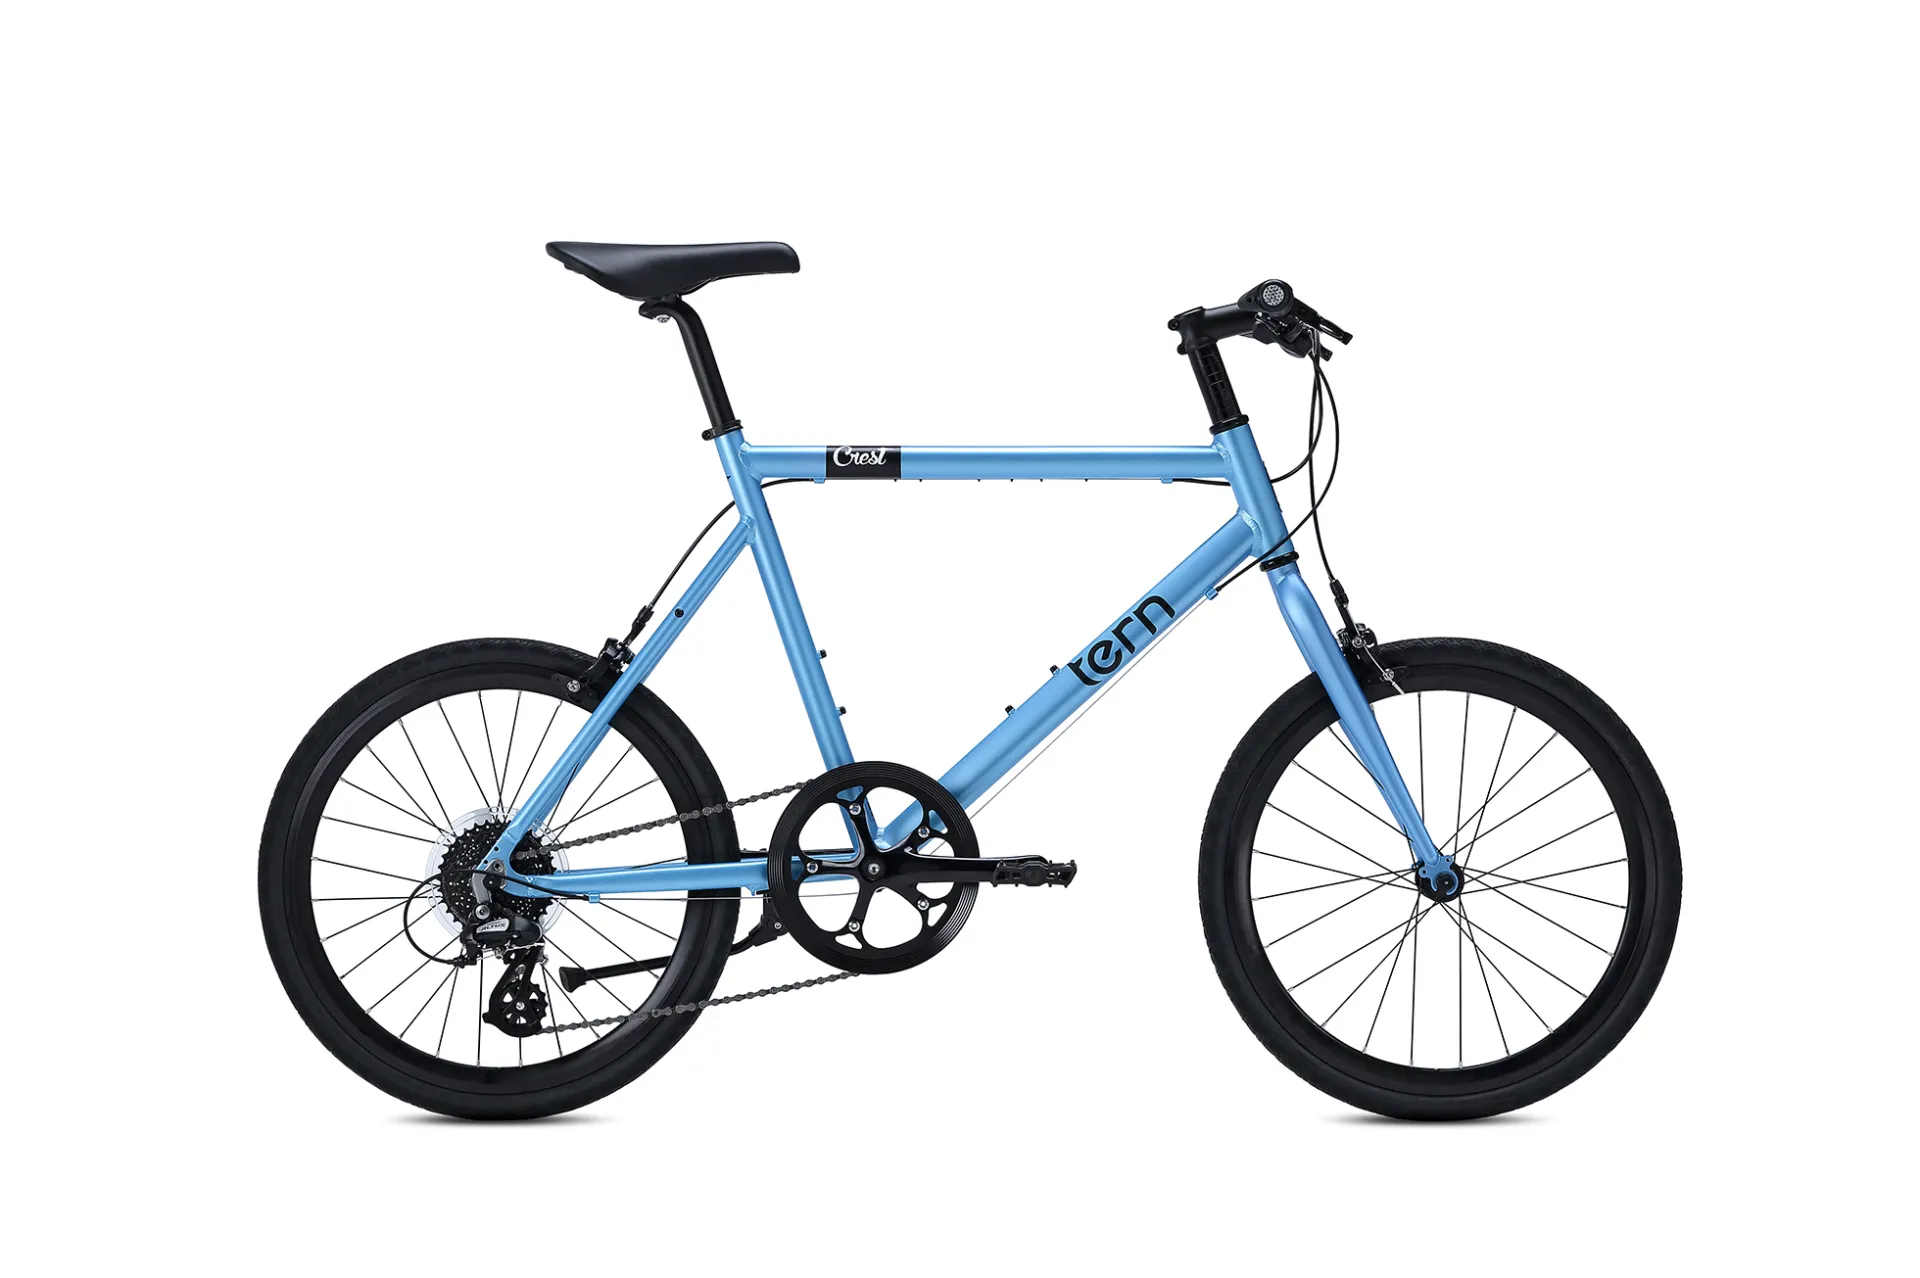 Crest | Tern Bicycles